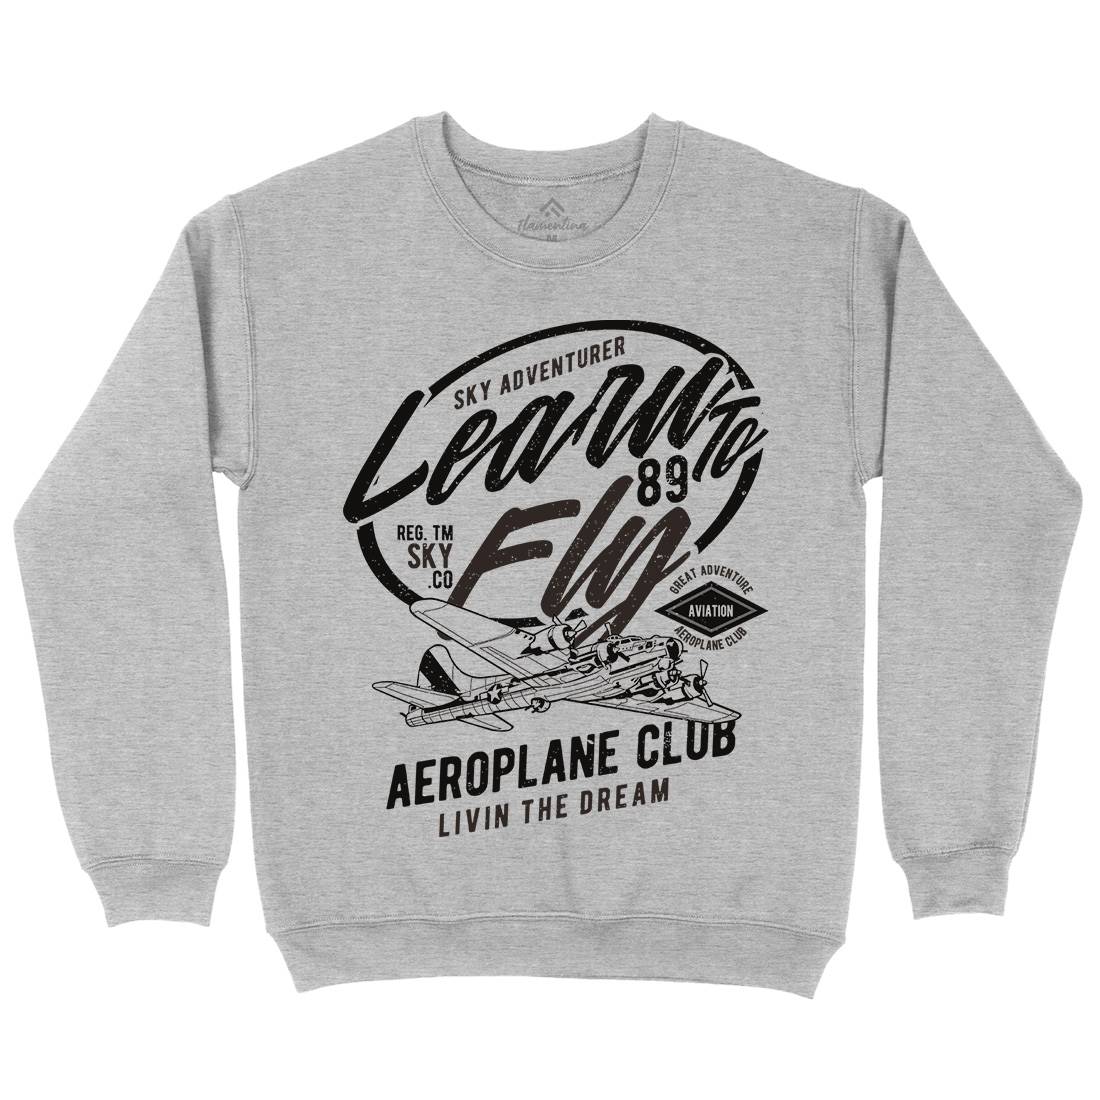 Learn To Fly Mens Crew Neck Sweatshirt Vehicles A704